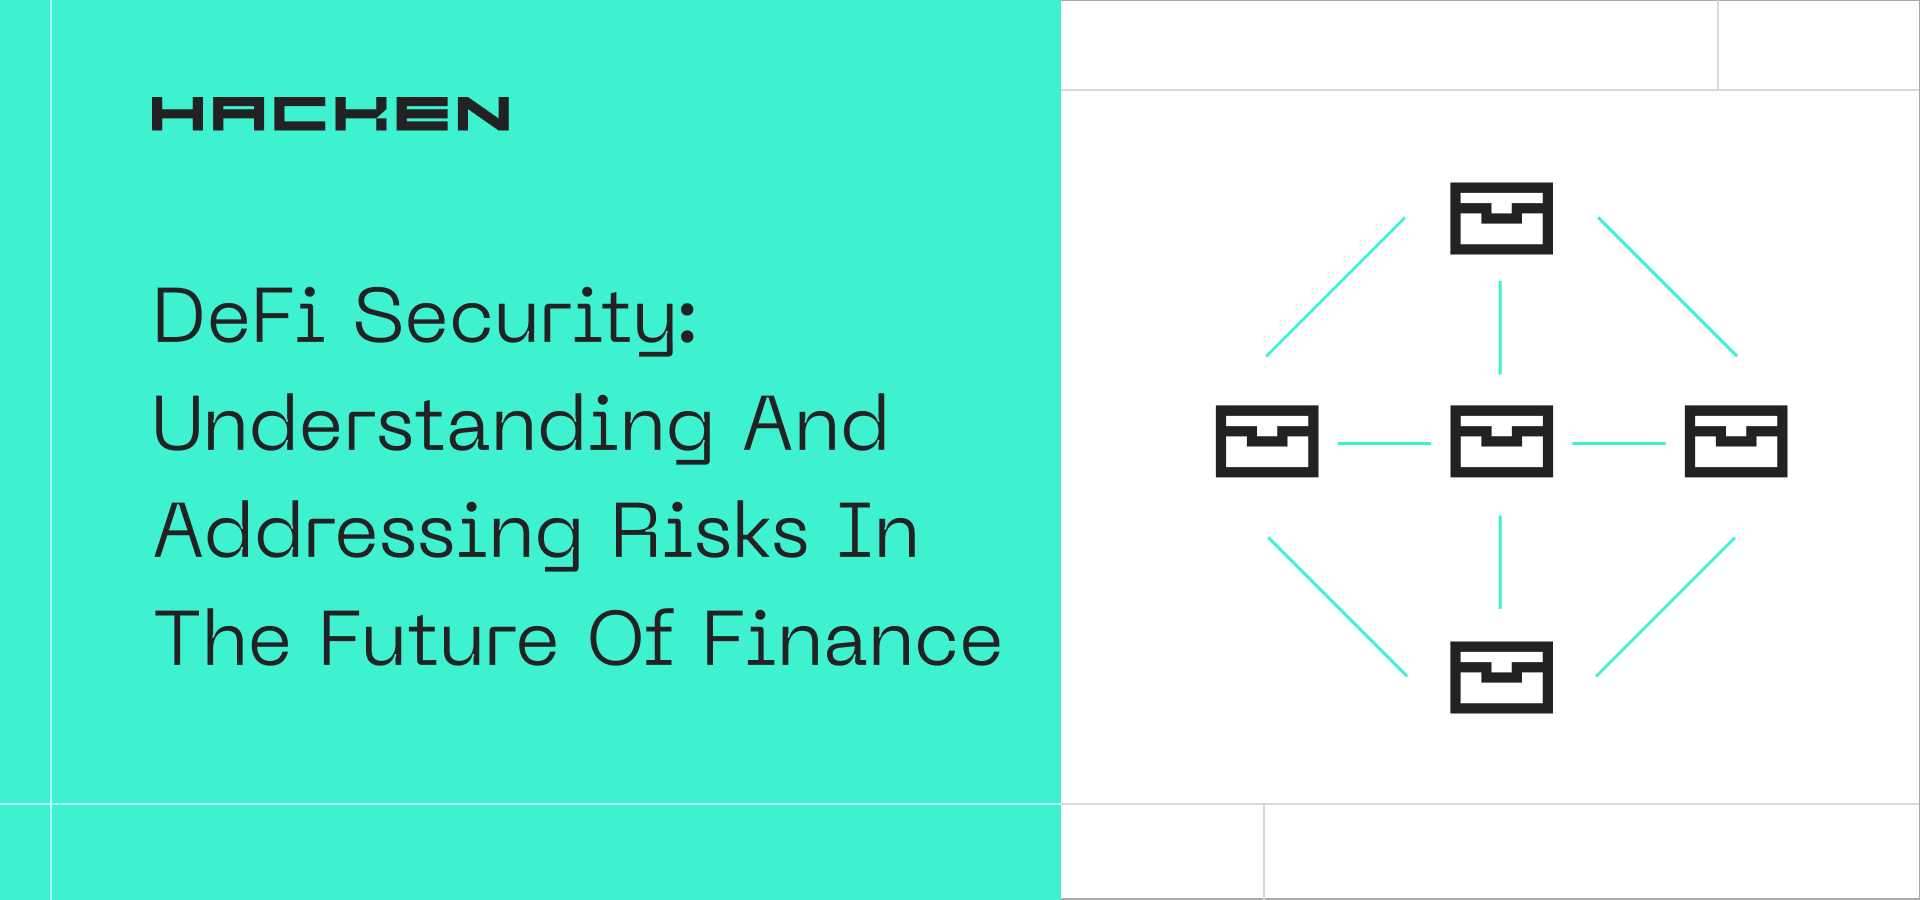 DeFi Security: Understanding And Addressing Risks In The Future Of Finance